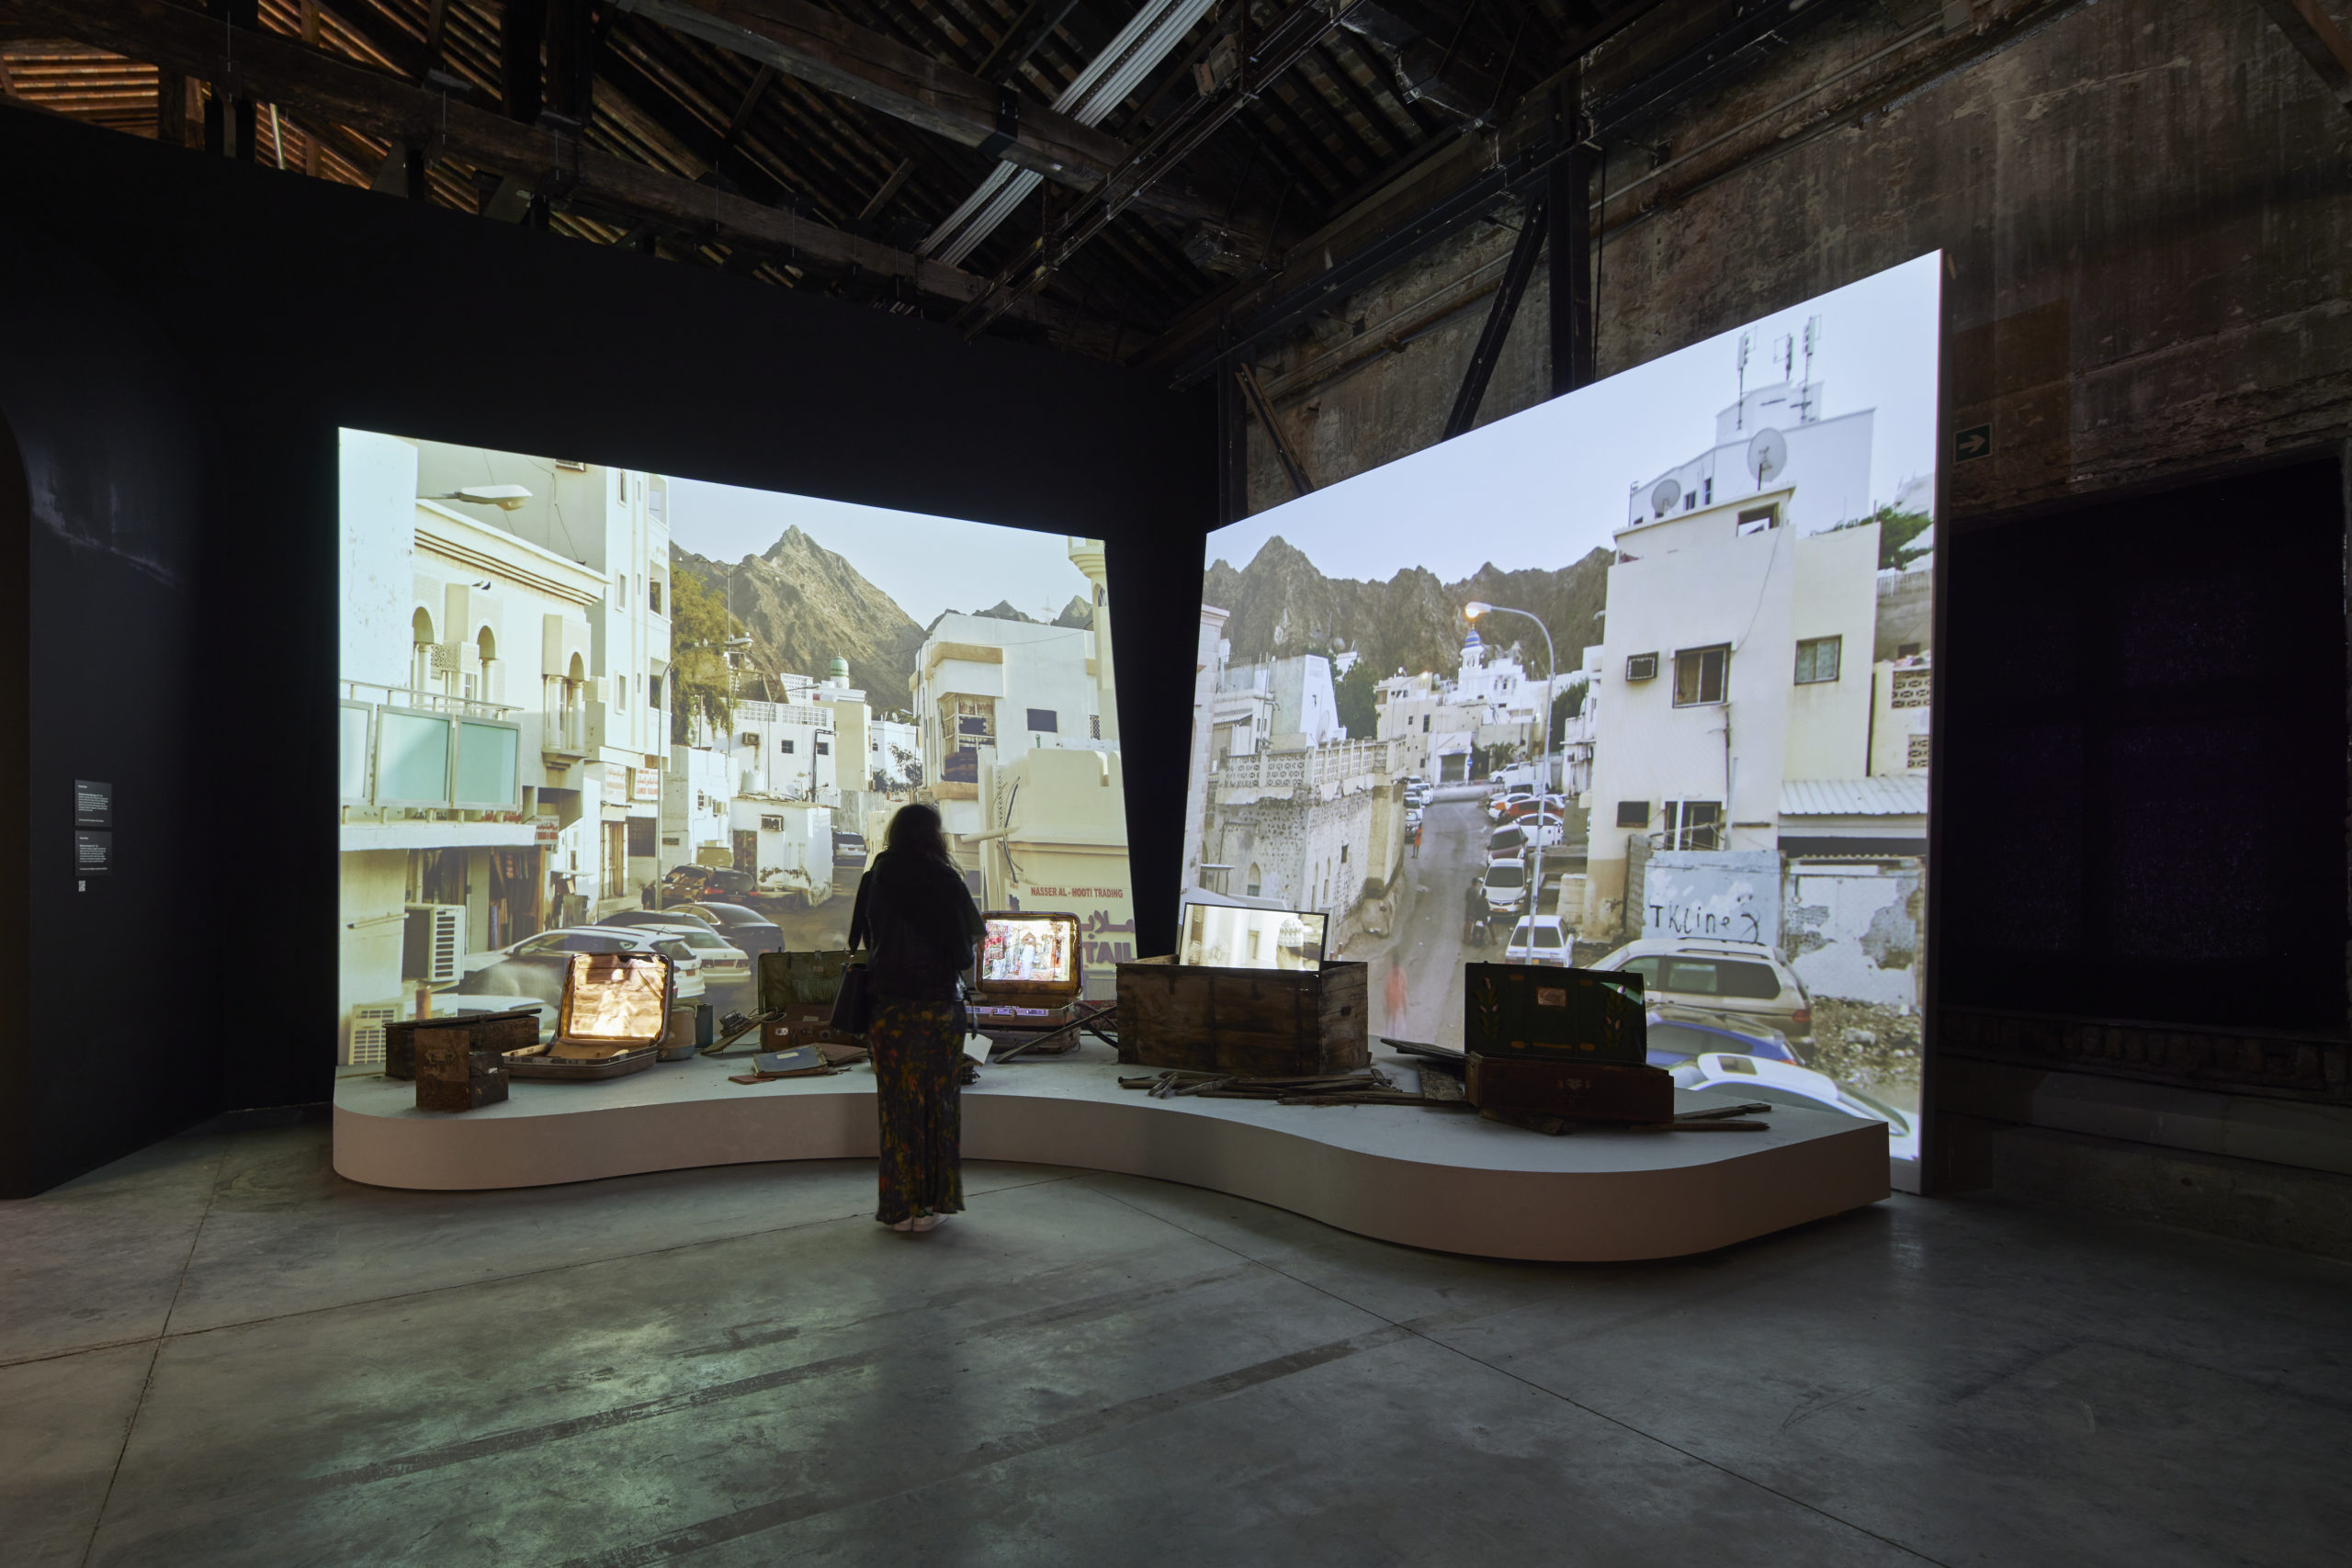 Installation view of "Reflections From Memories, 2009 – 2022,” Hassan Meer, 2022, Oman Pavilion, Venice Biennale; © Hassan Meer, photo by David Levene, courtesy of the artist.